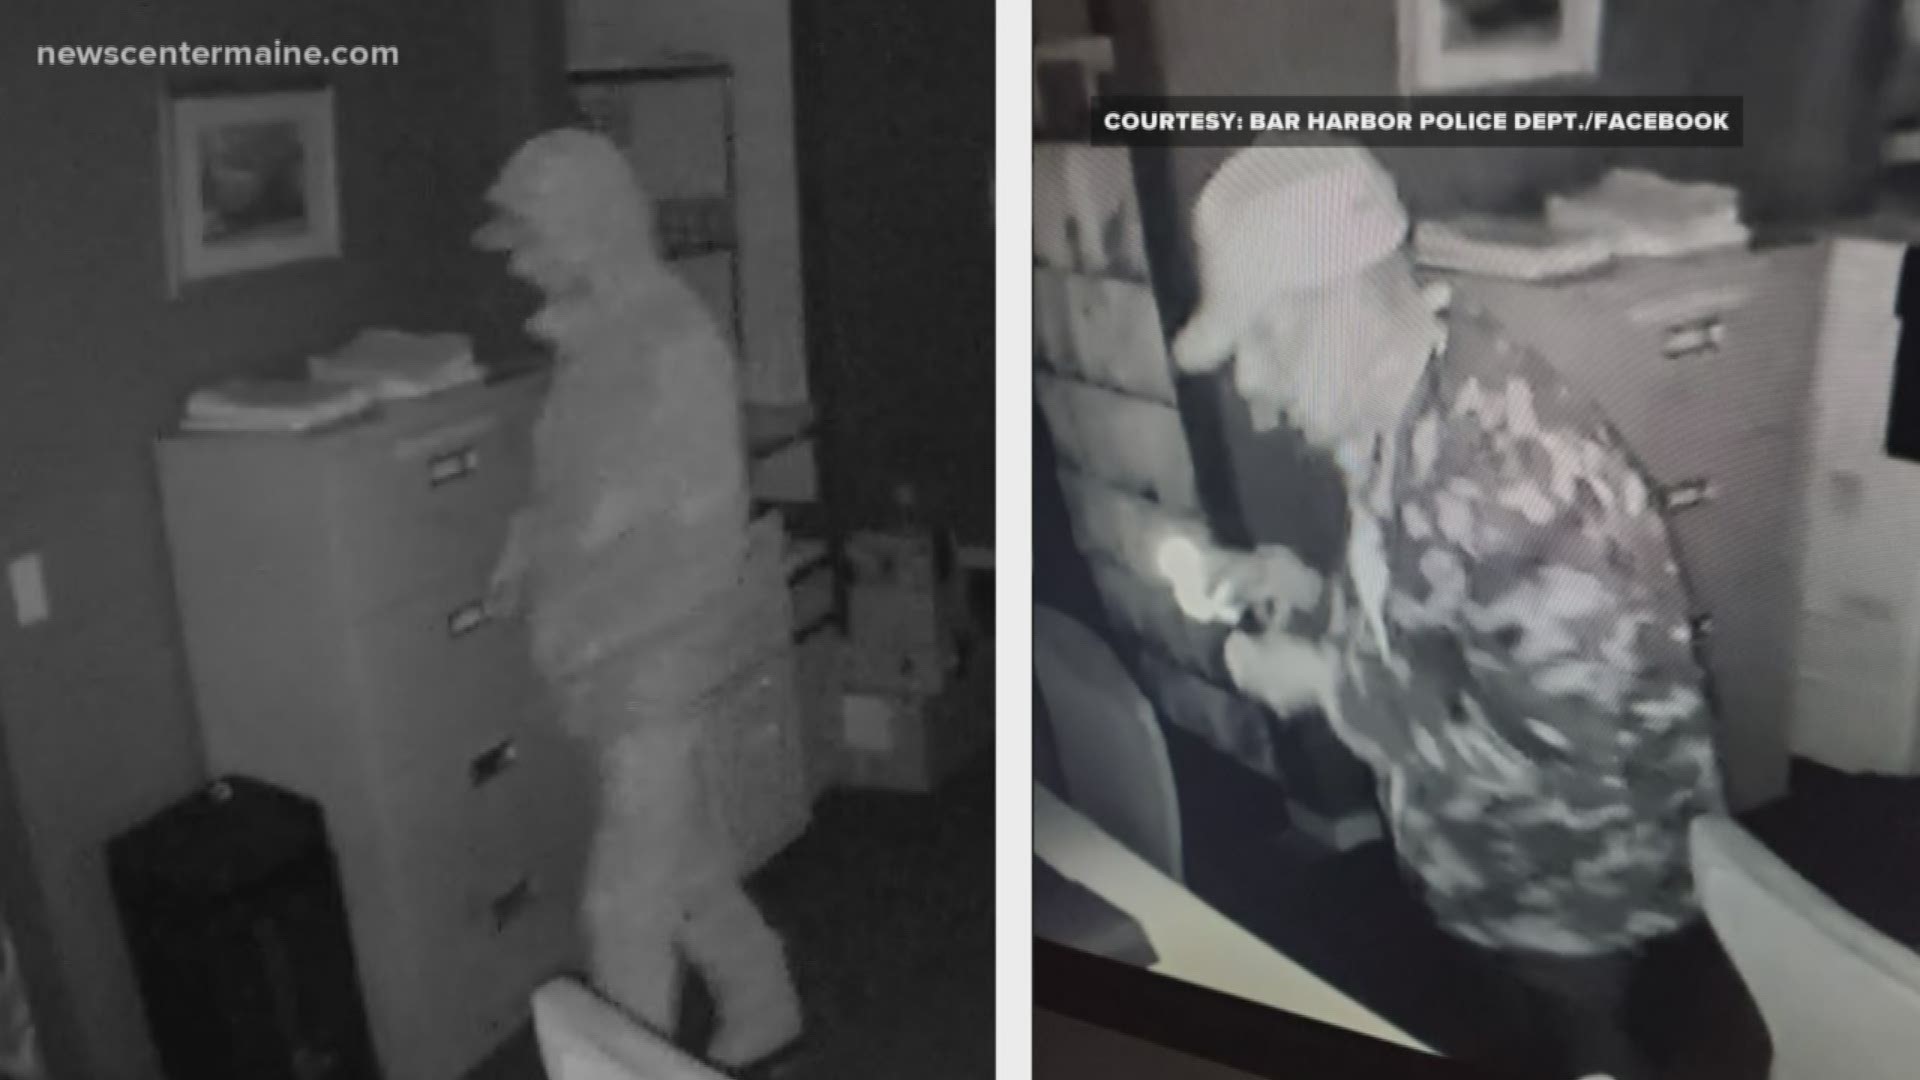 Police in the Bar Harbor area are asking for help identifying two men who committed a burlary.